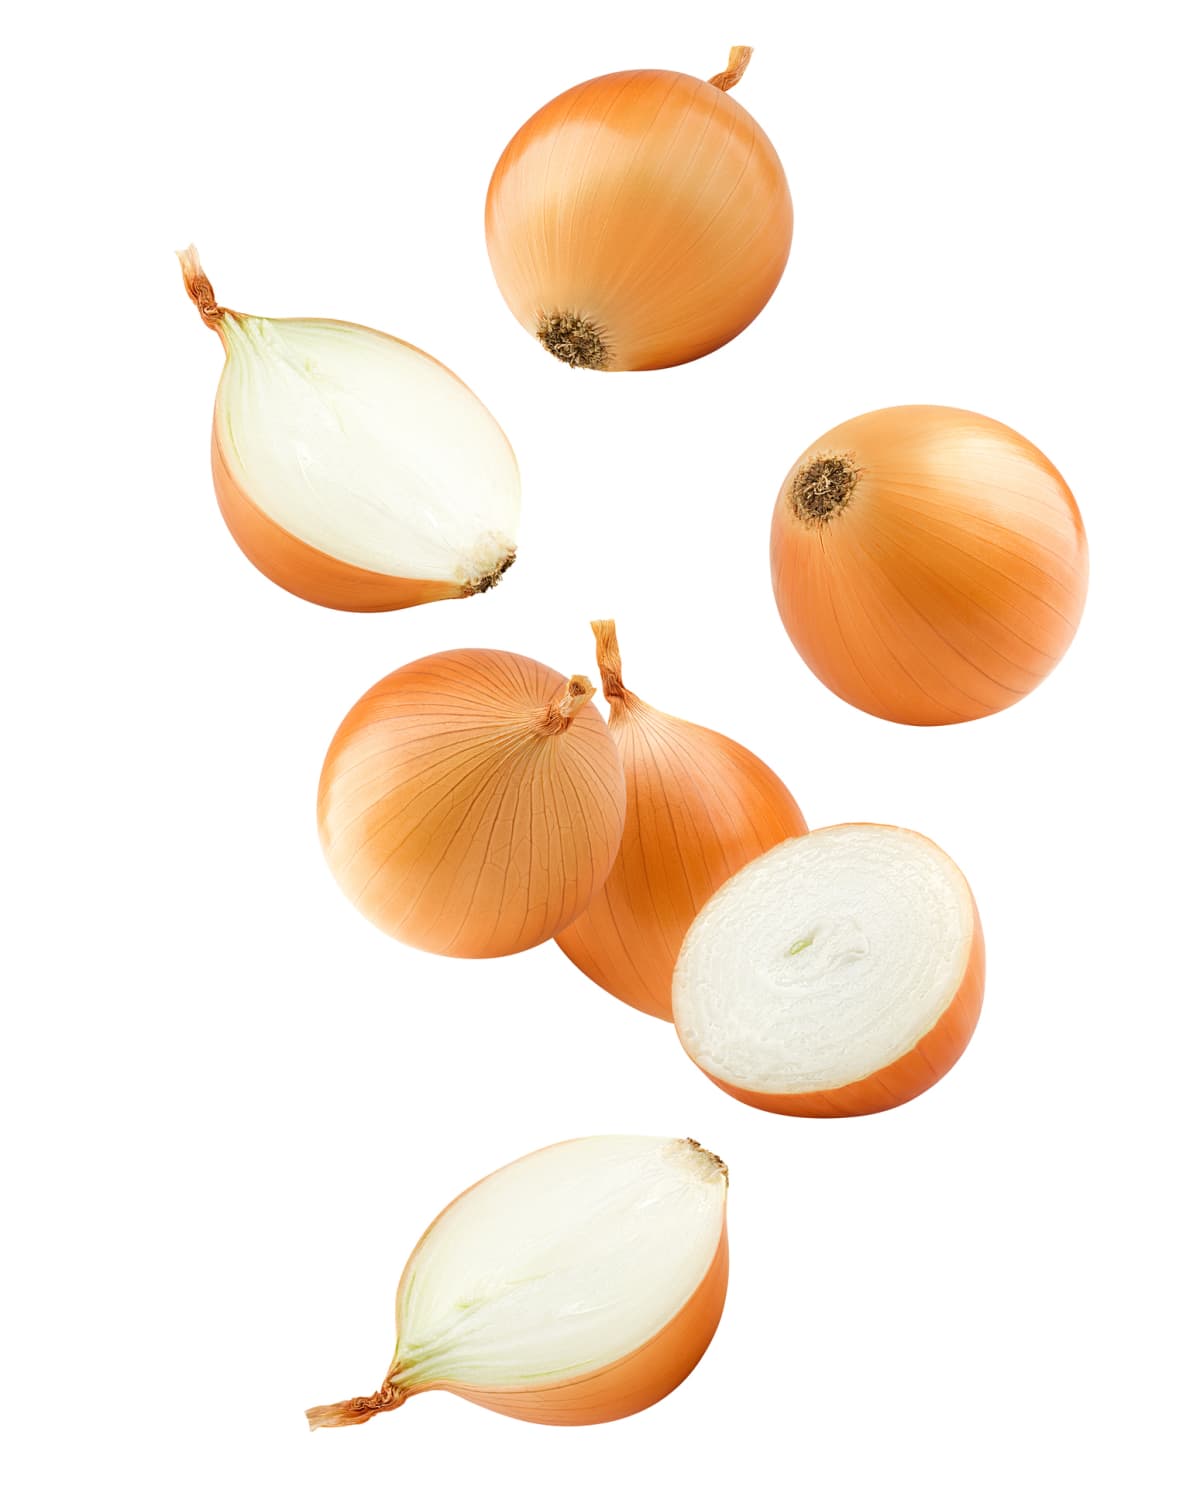 Raw onions on a white background